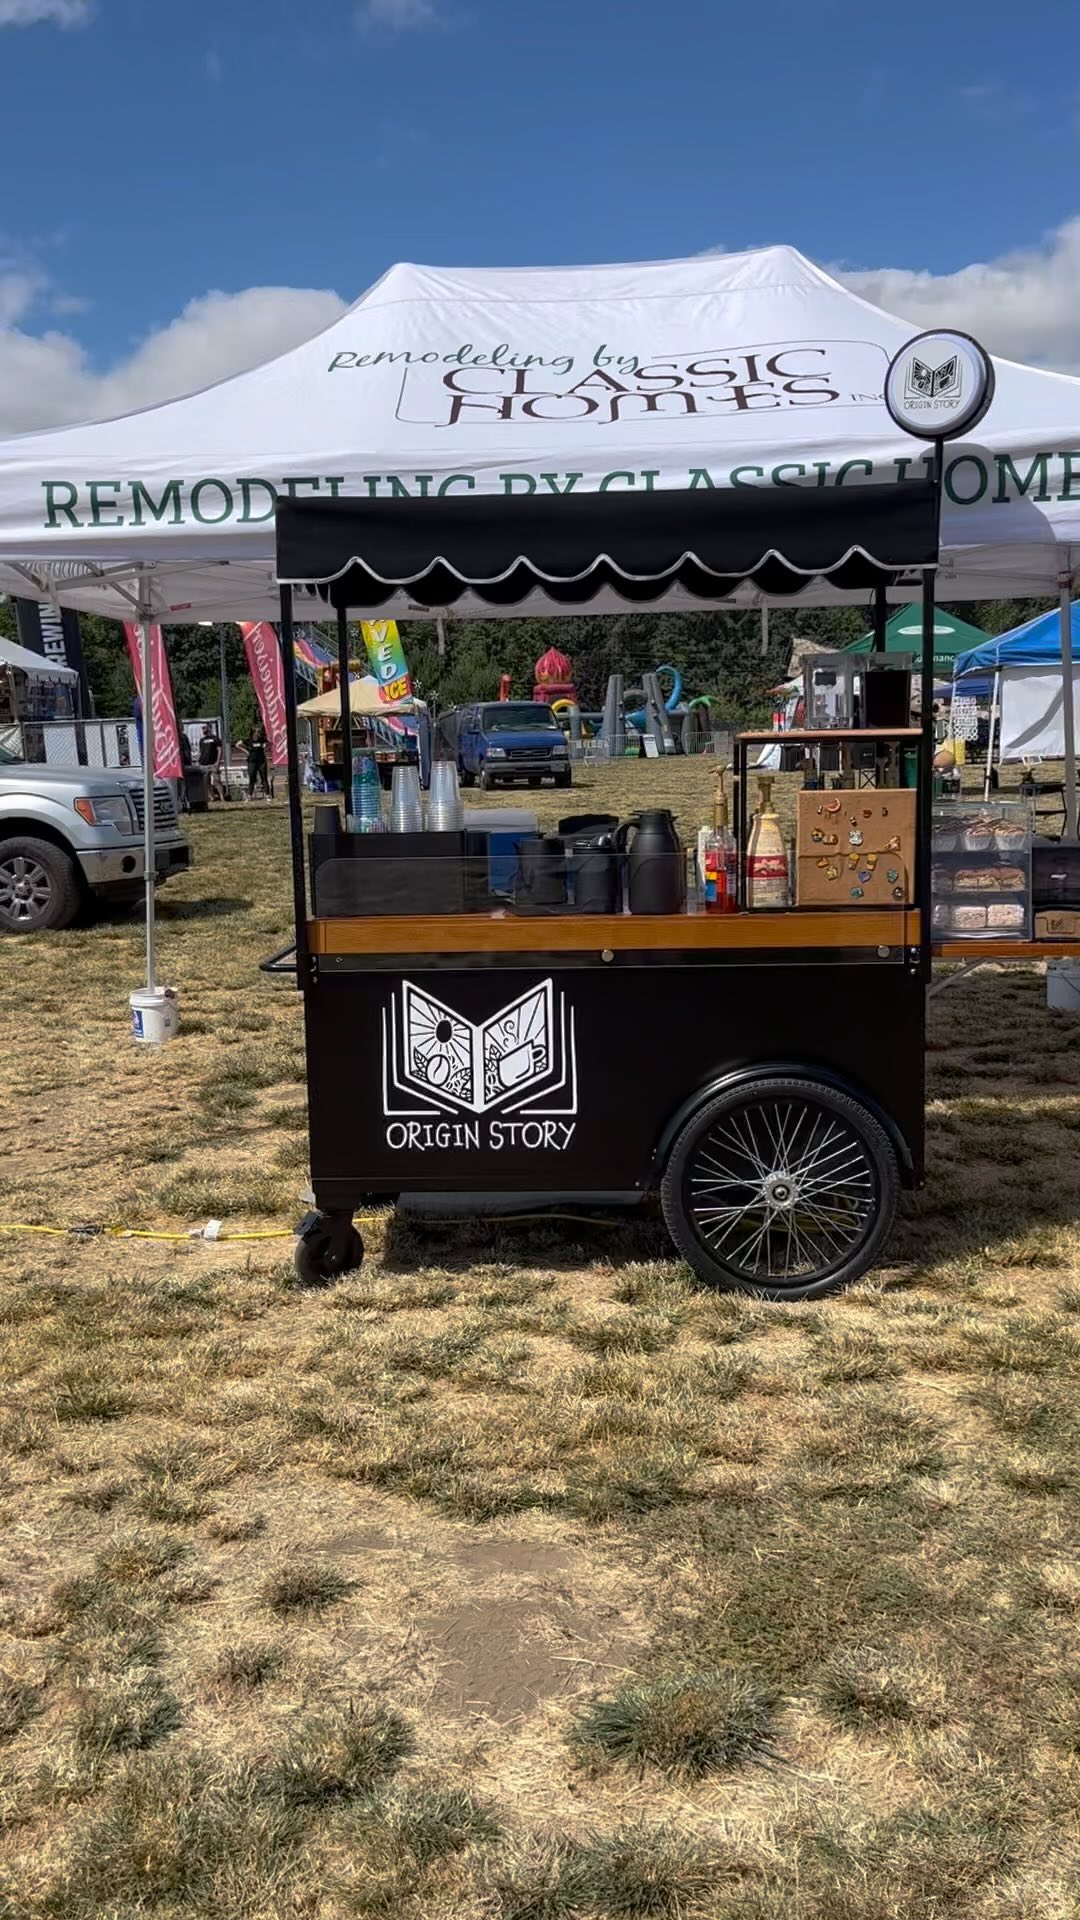 Come find us at Keizer fest! Today, Saturday (at the parade then the festival) and Sunday!